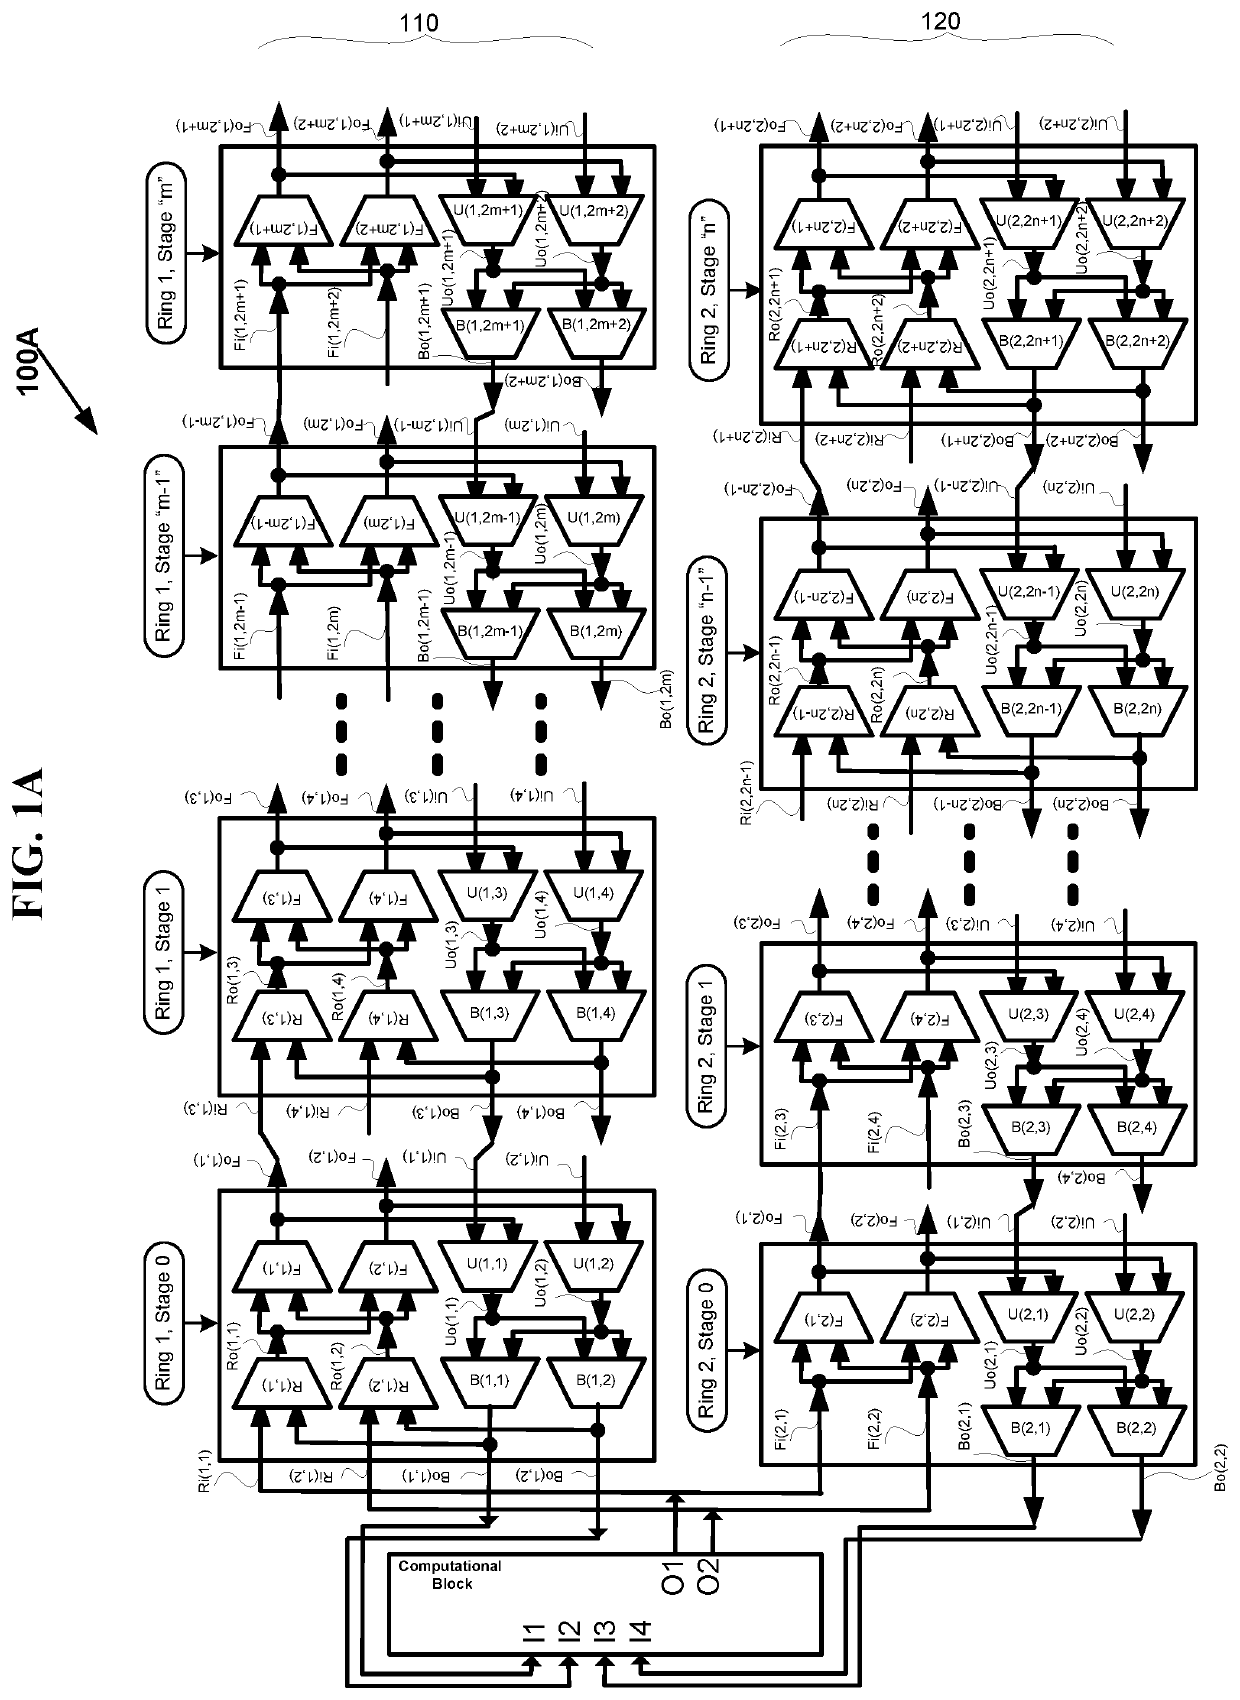 Automatic multi-stage fabric generation for FPGAs